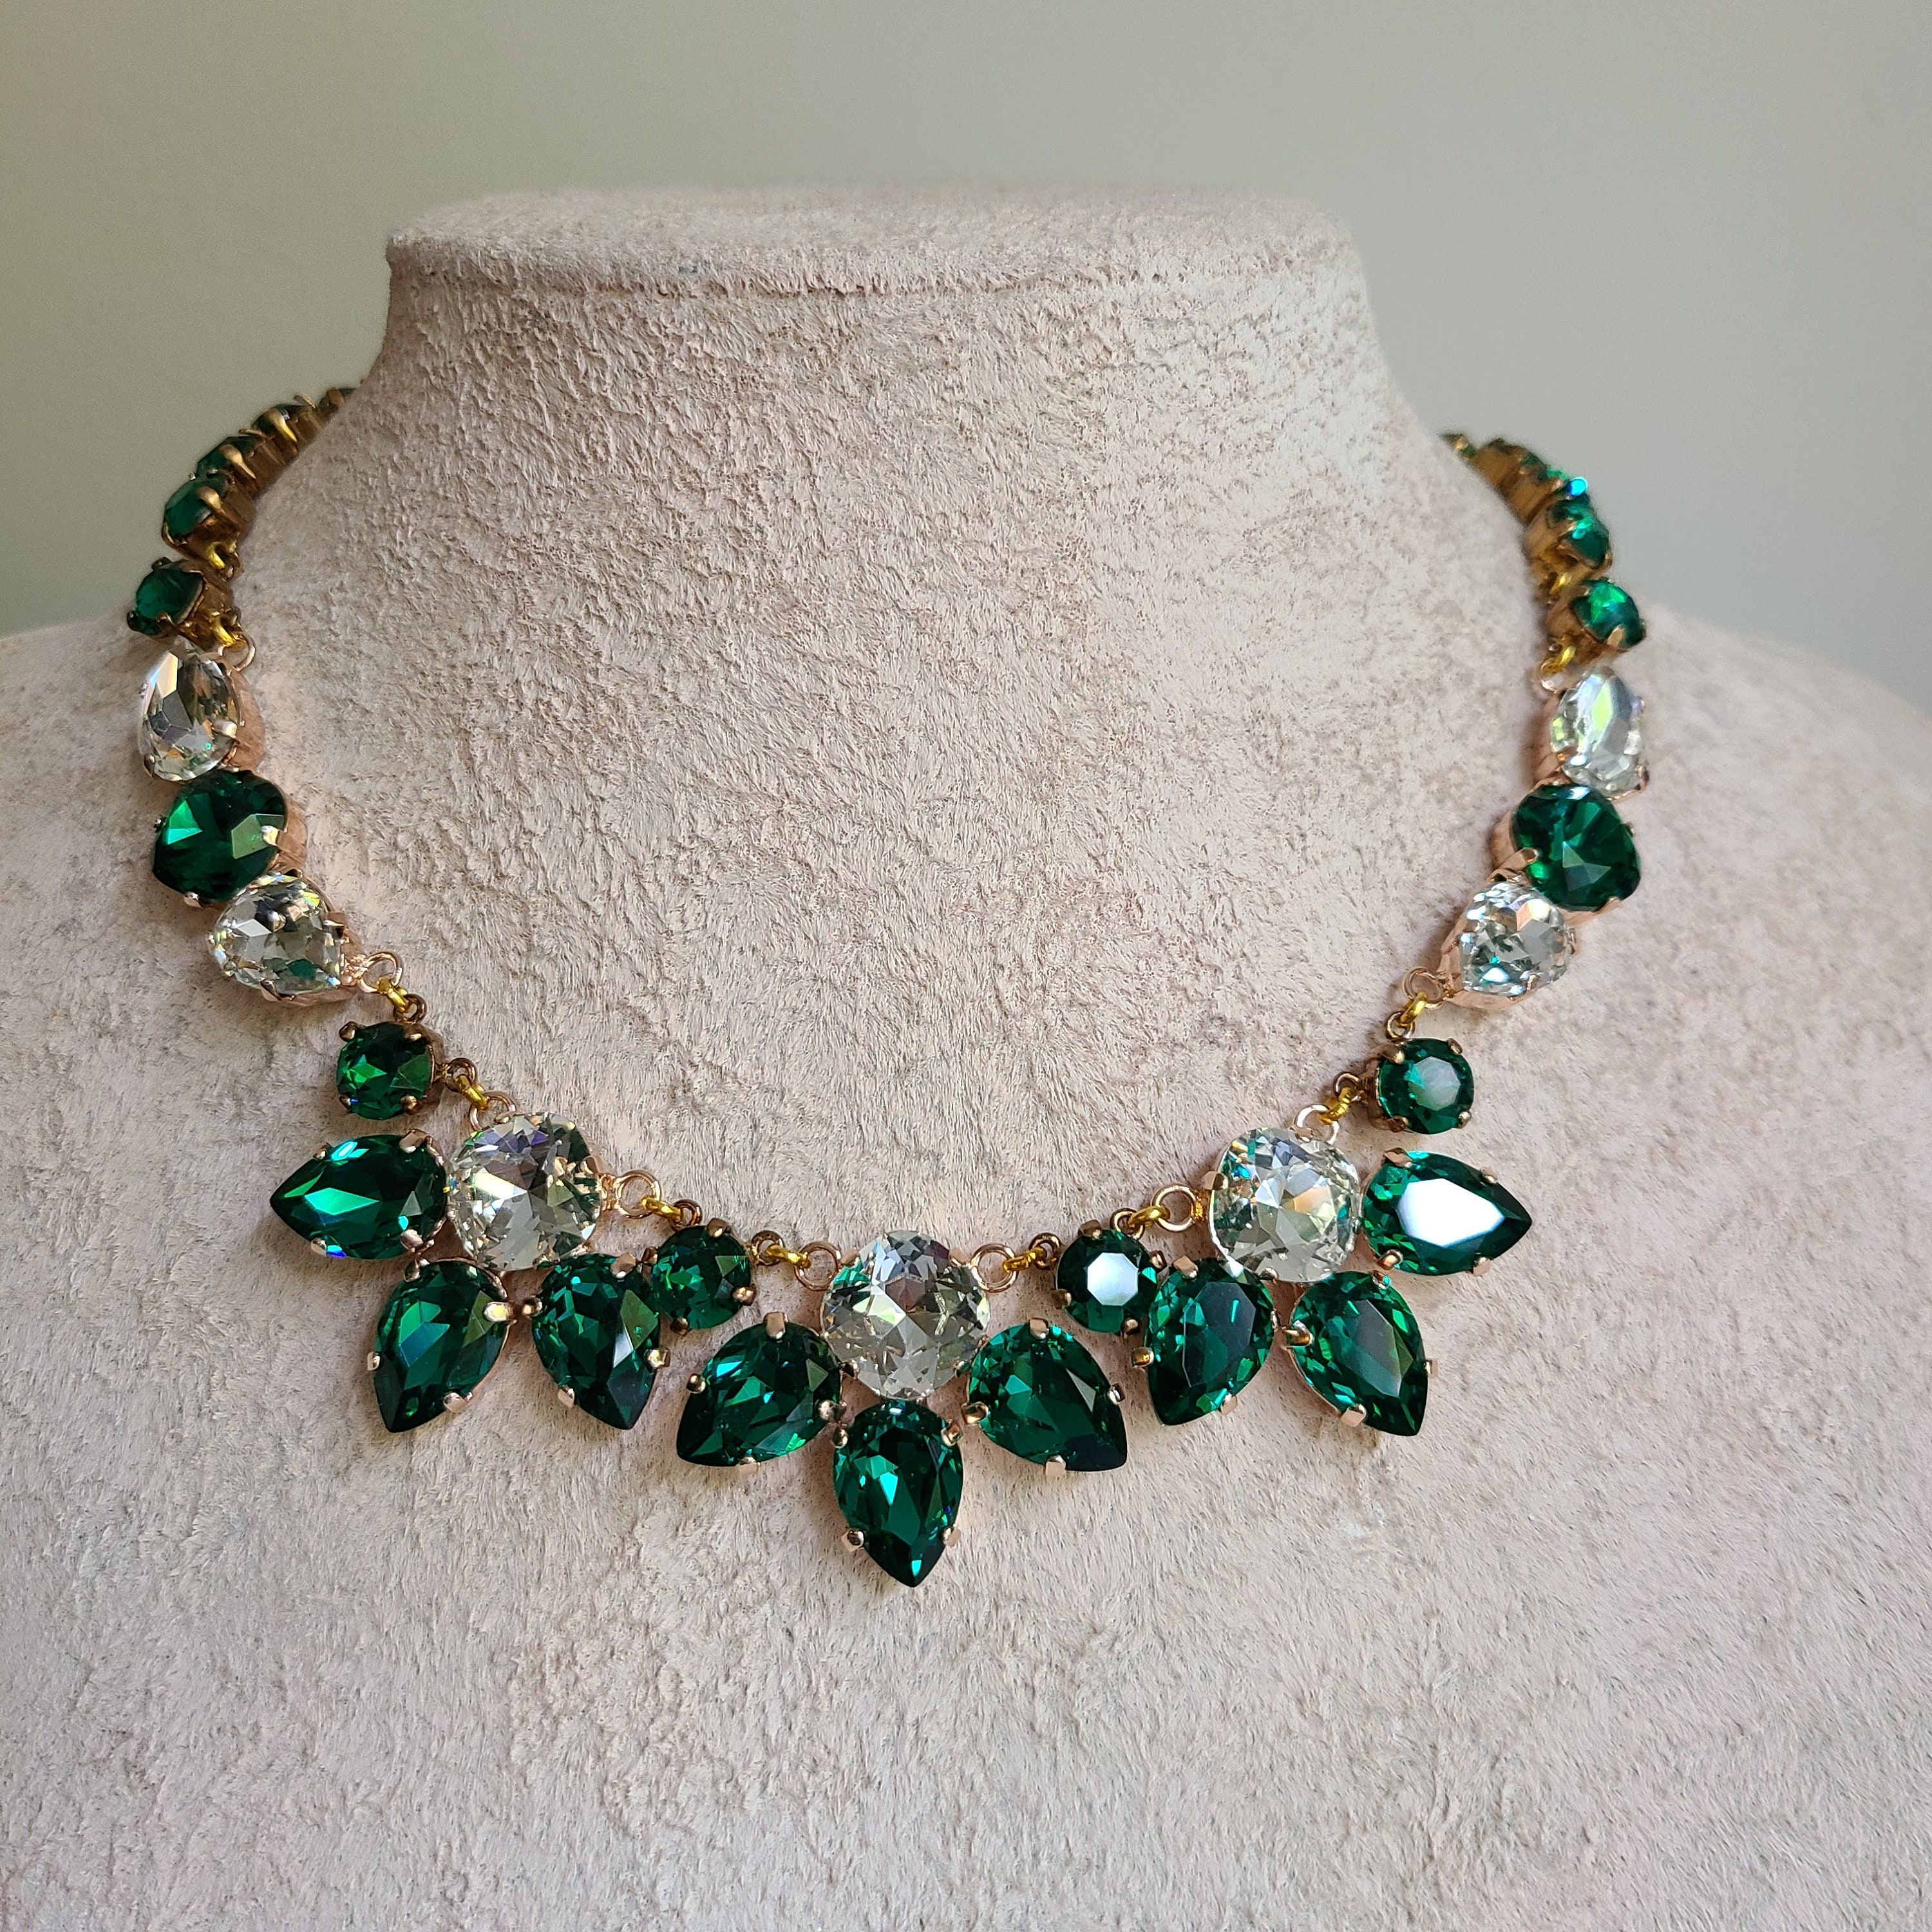 Kinsley Gold Statement Necklace in Green Mix | Kendra Scott